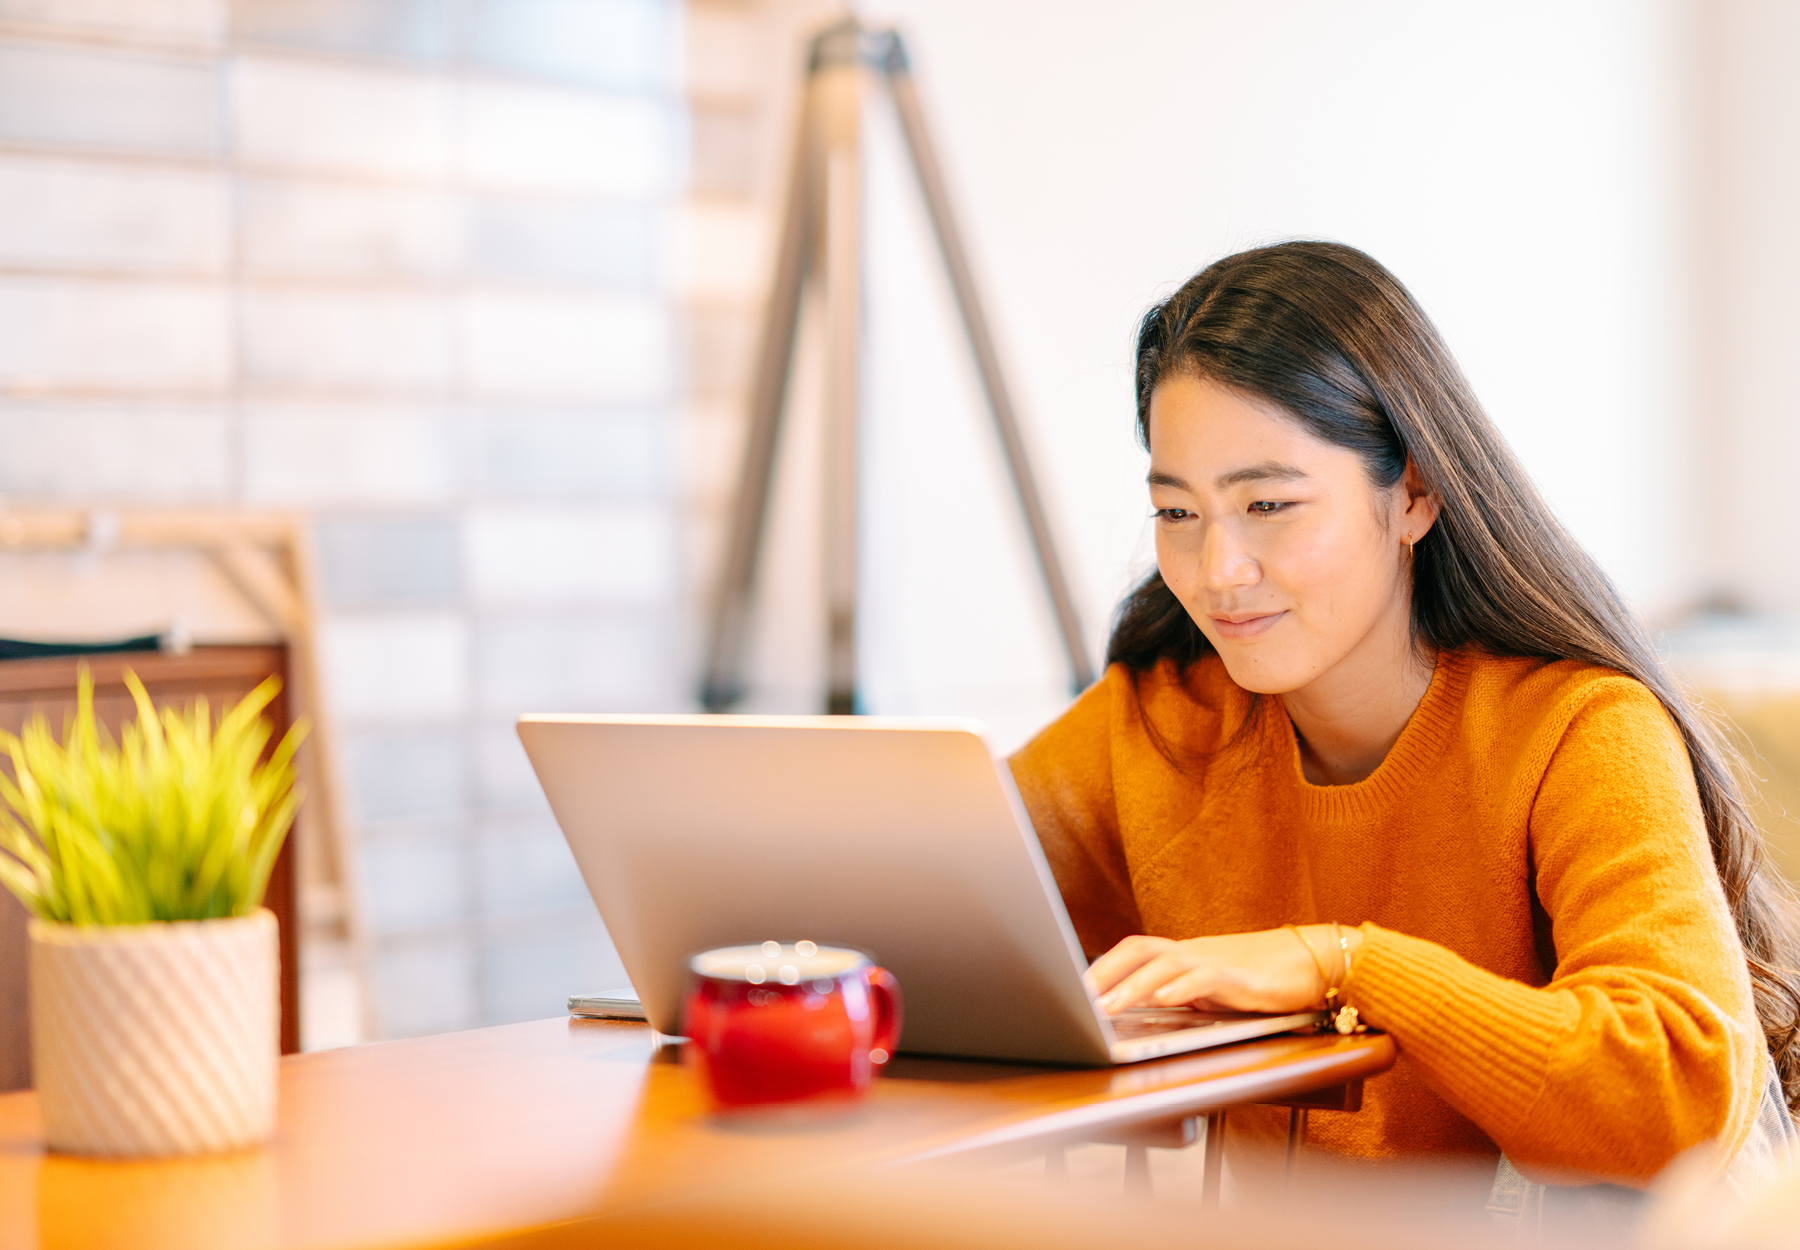 Woman in a dark yellow/light orange sweater is working on a laptop at a table in her home. Remote work concept. iStock image.